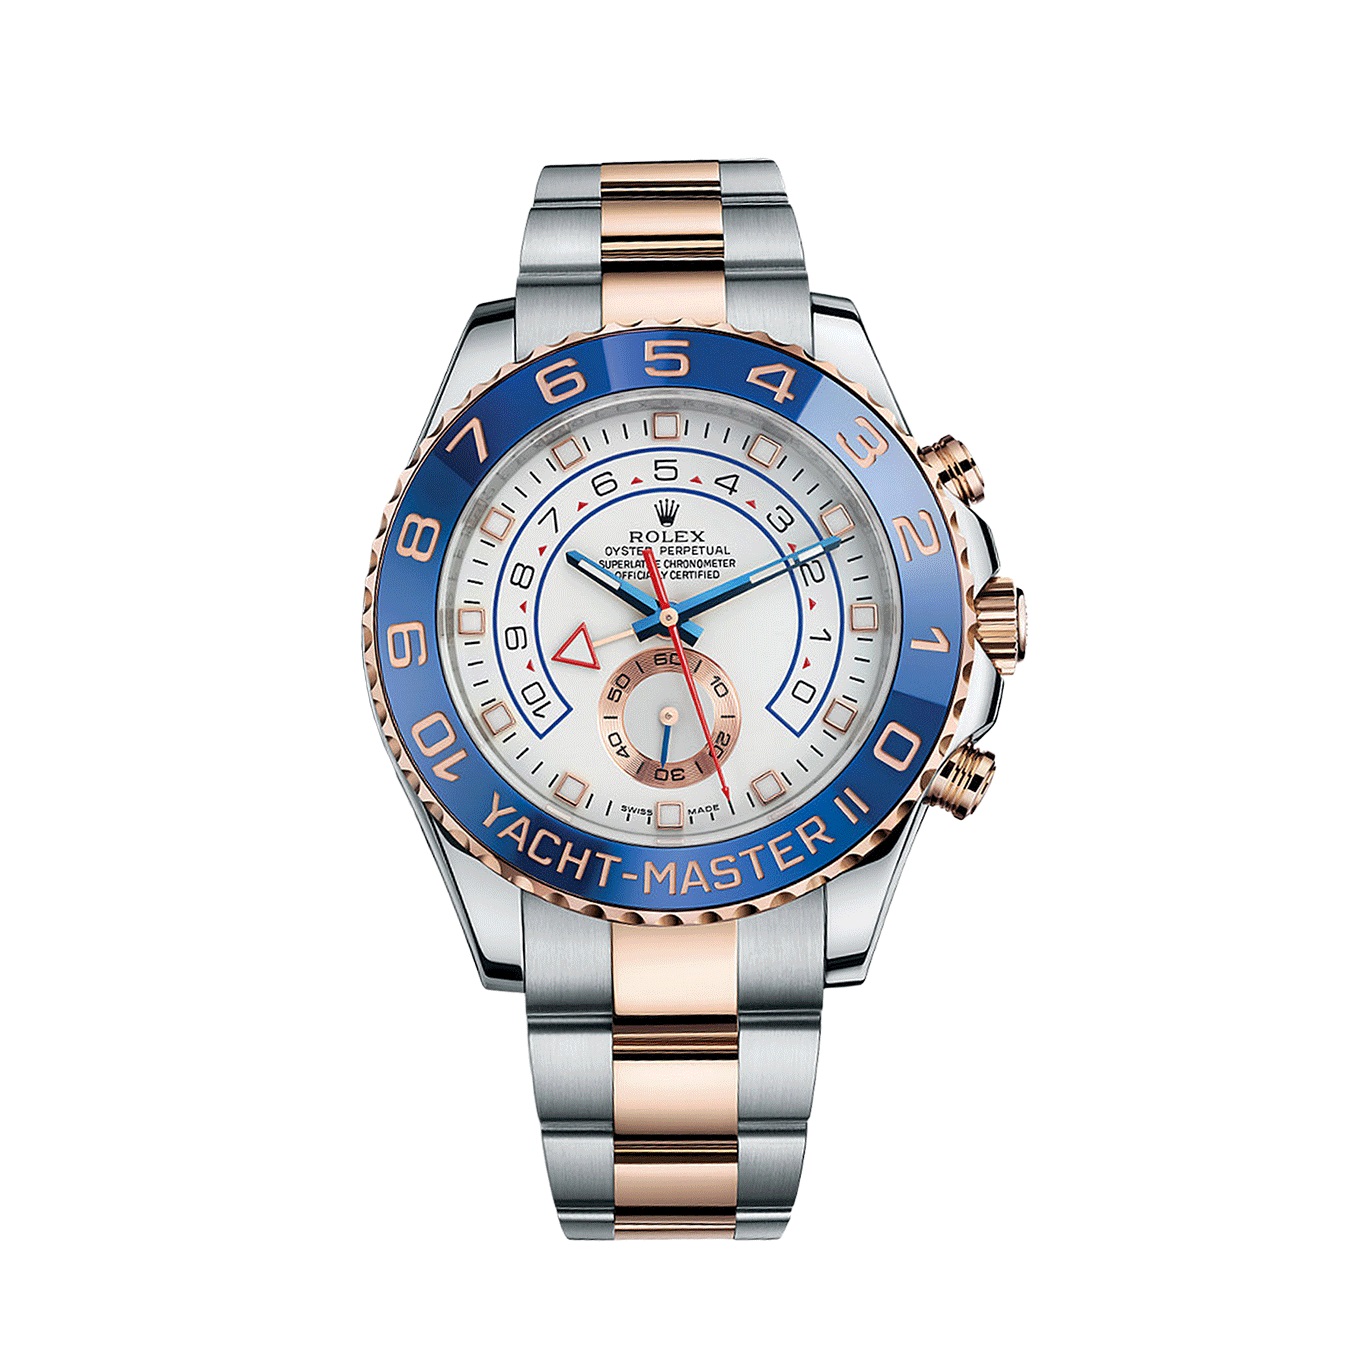 Yacht-Master II 116681 Rose Gold & Stainless Steel Watch (White)